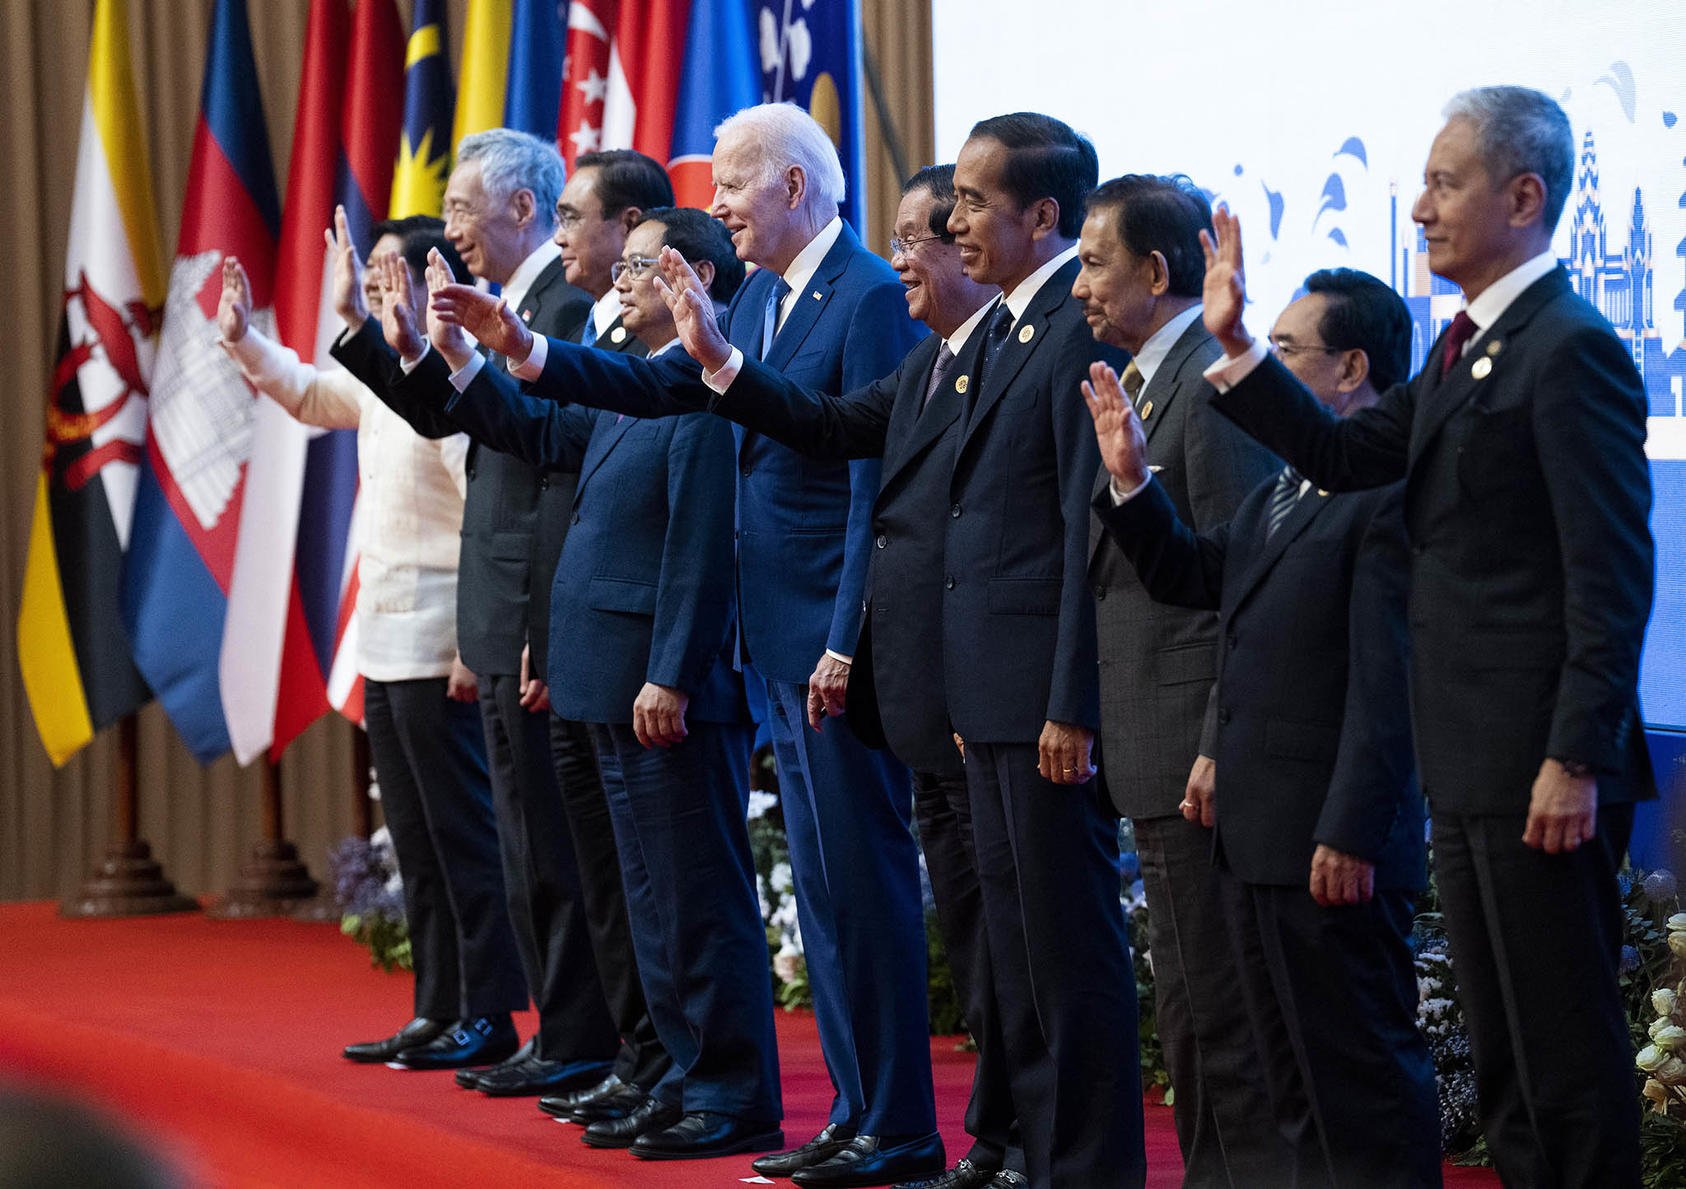 President Joe Biden poses with leaders from ASEAN at the East Asia Summit in Phnom Penh, Cambodia, on Saturday, Nov. 12, 2022. (Doug Mills/The New York Times)